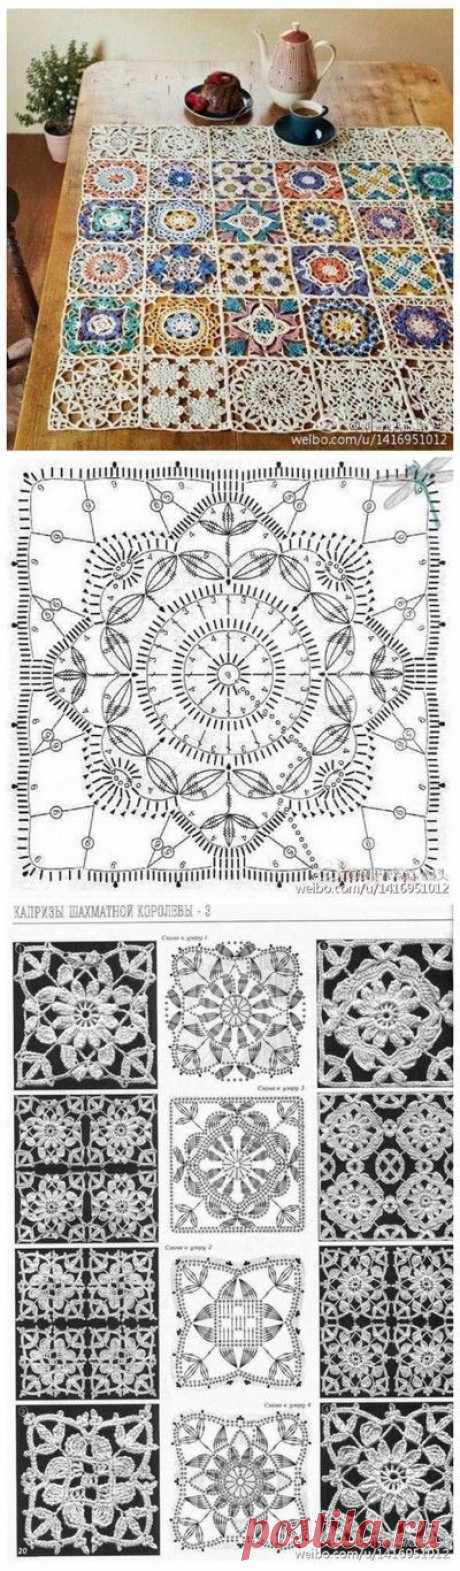 (189) Nice idea for those motifs you make when trying out a pattern with scrap yarn. 堆糖－美好生活研究所 | Crochet stitches I find interesting